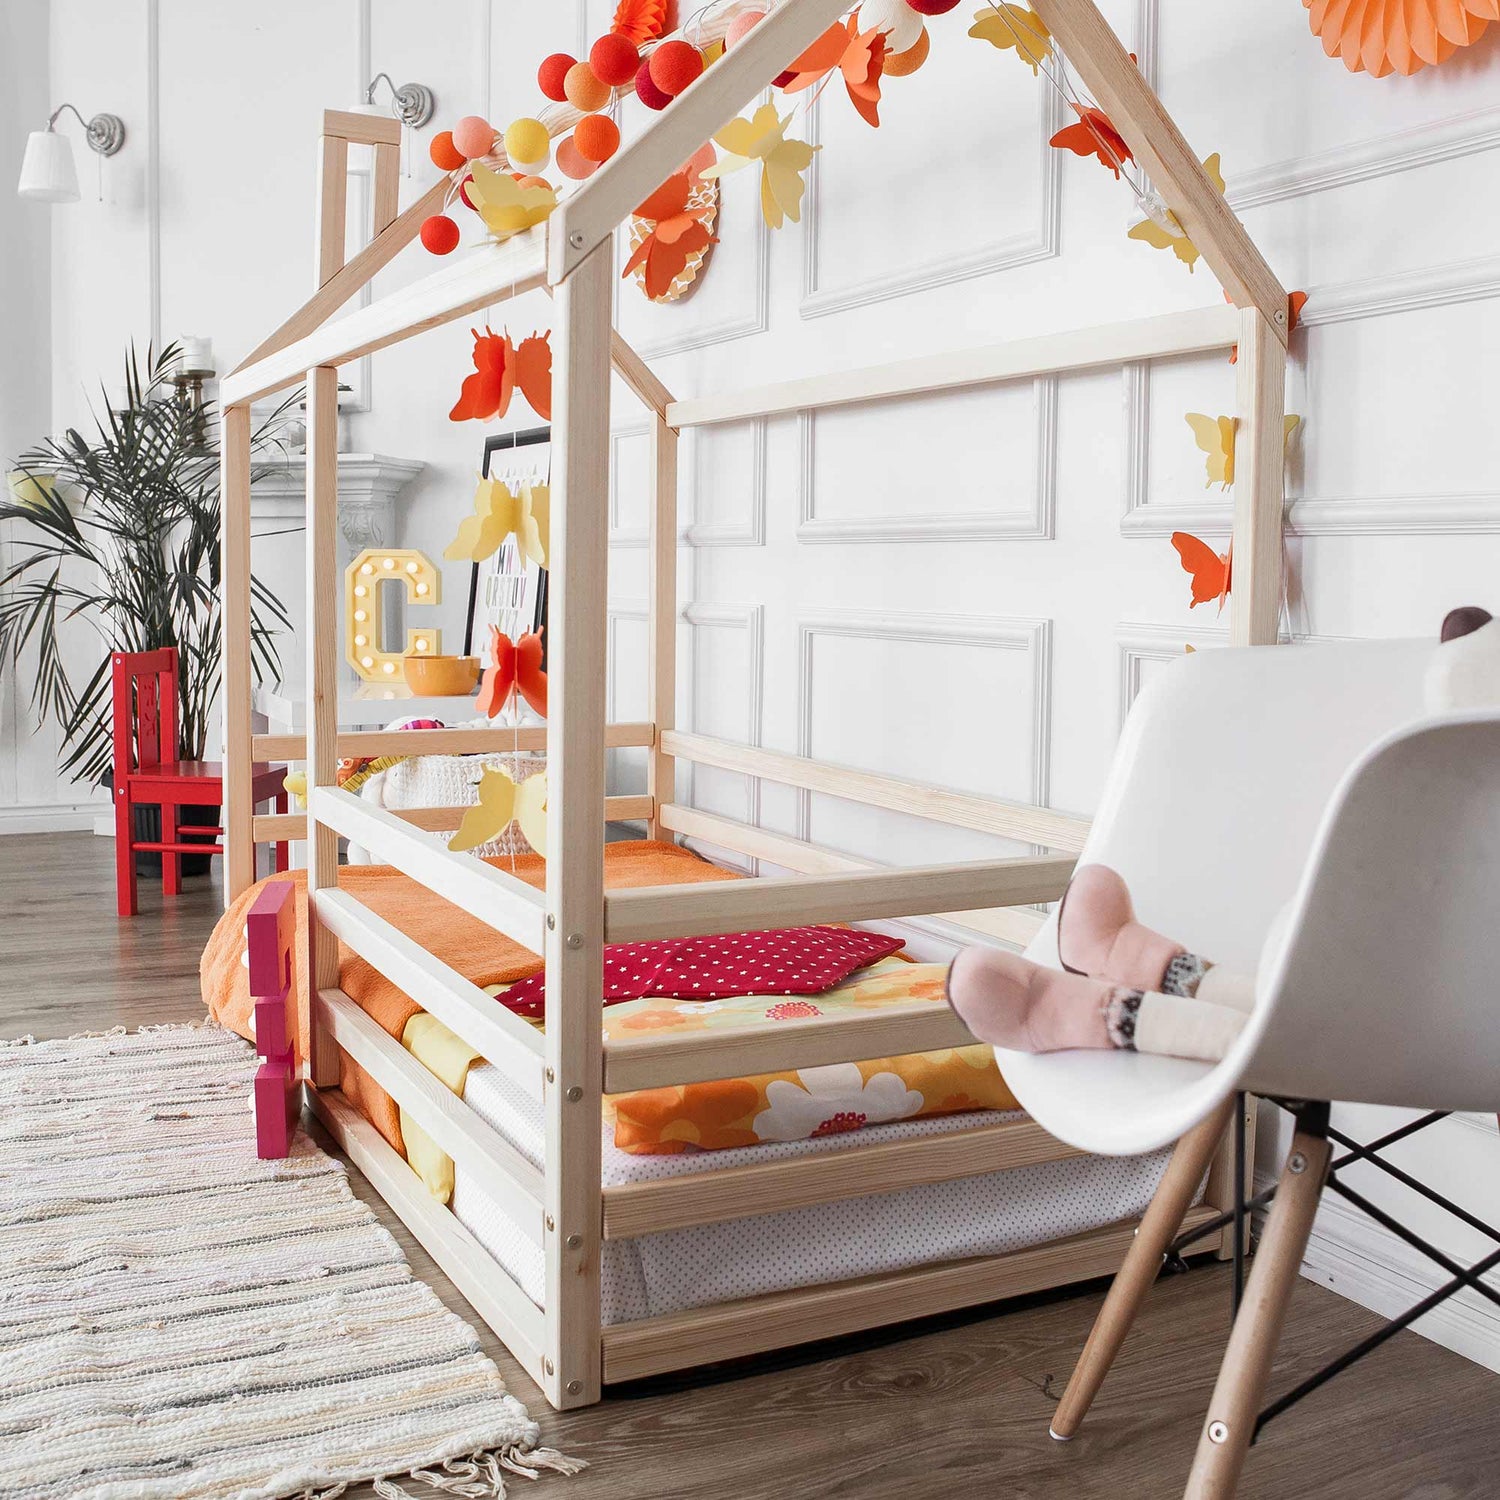 A child's room with a wooden bed and chair.